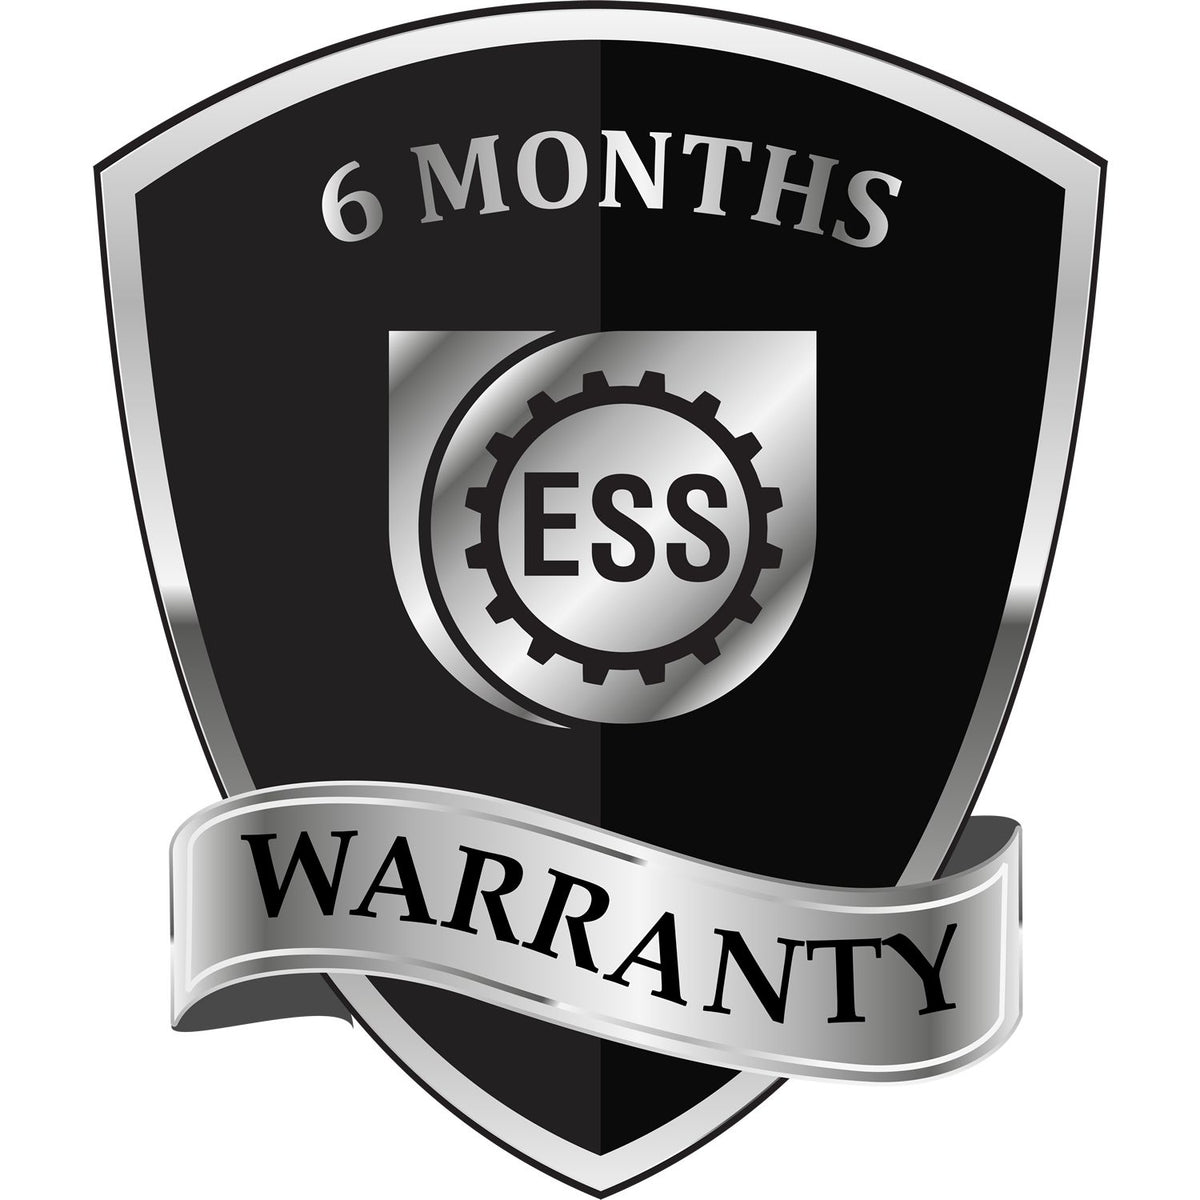 A badge or emblem showing a warranty icon for the Montana Landscape Architectural Seal Stamp